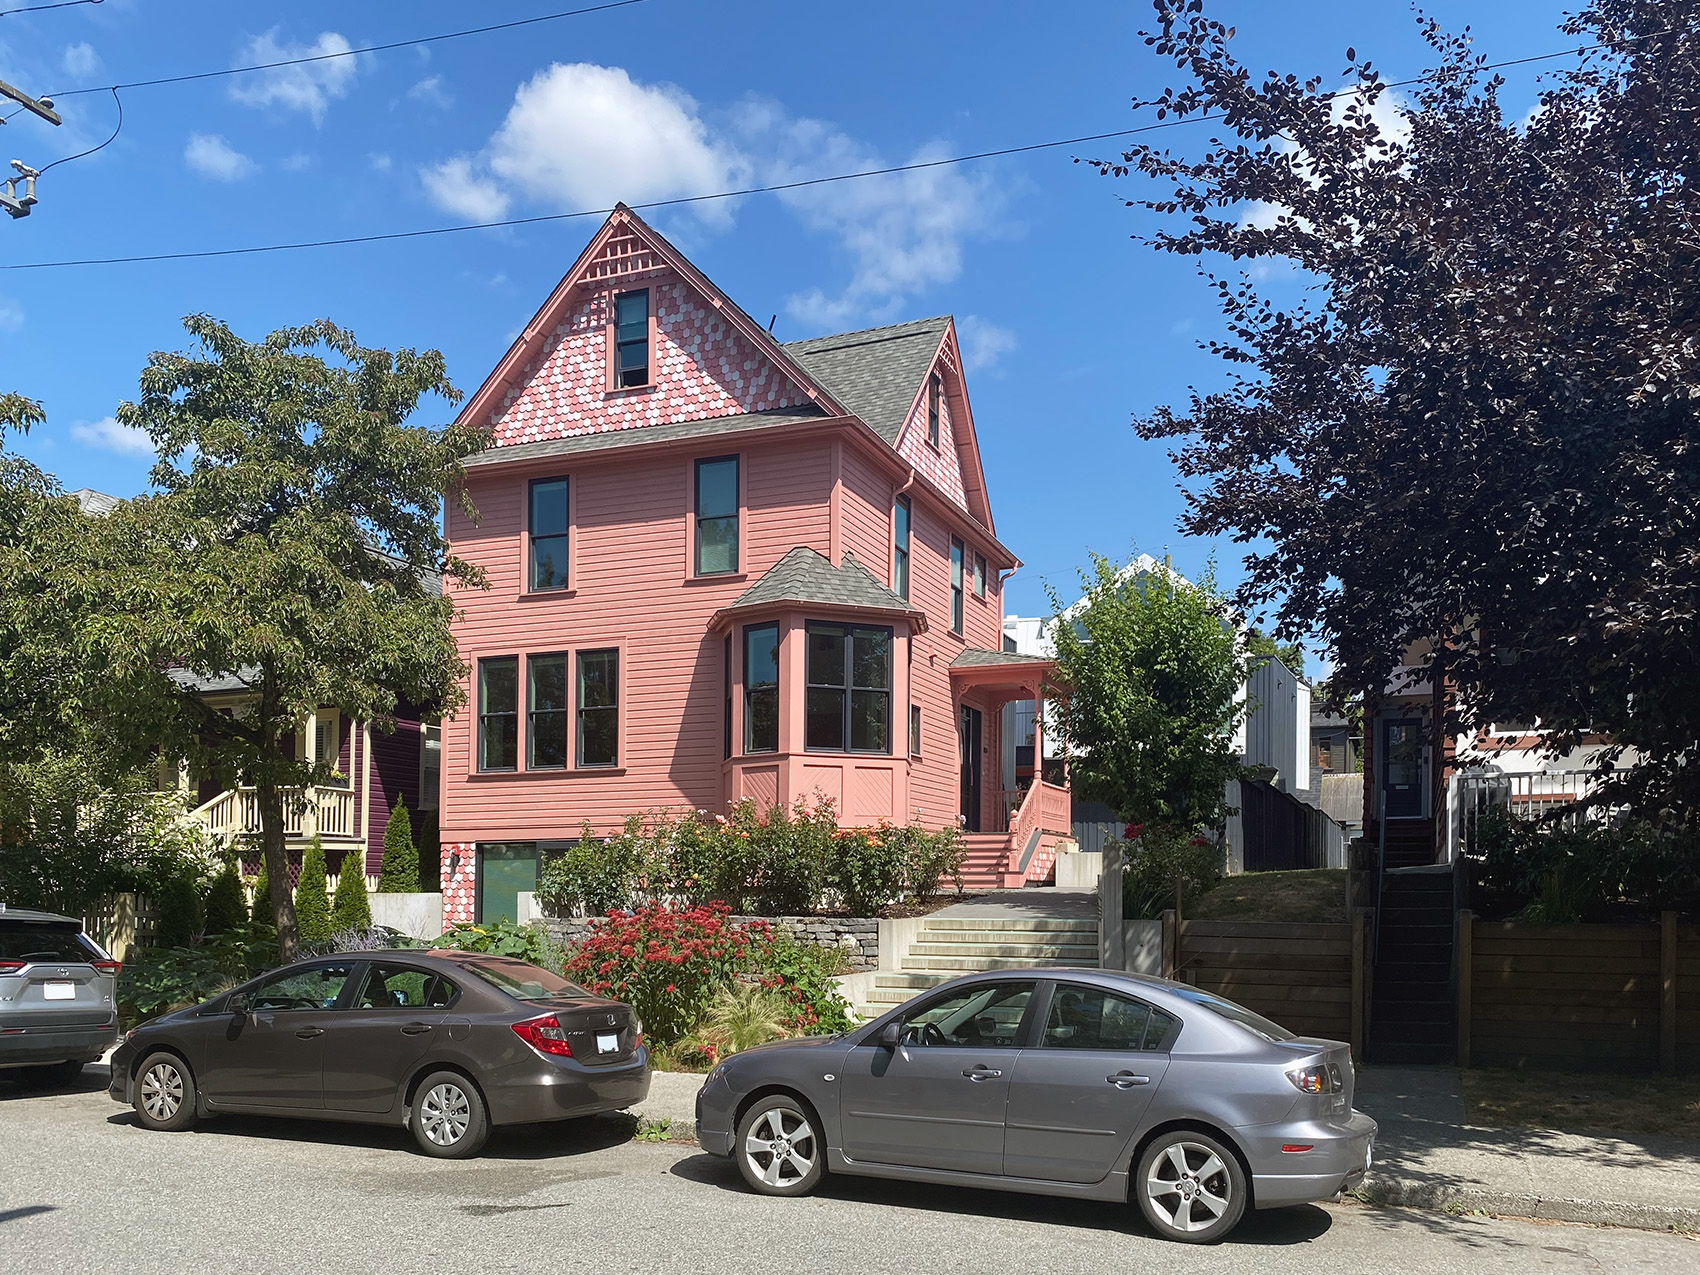 Pink House & The Octopus, 1900s/2020